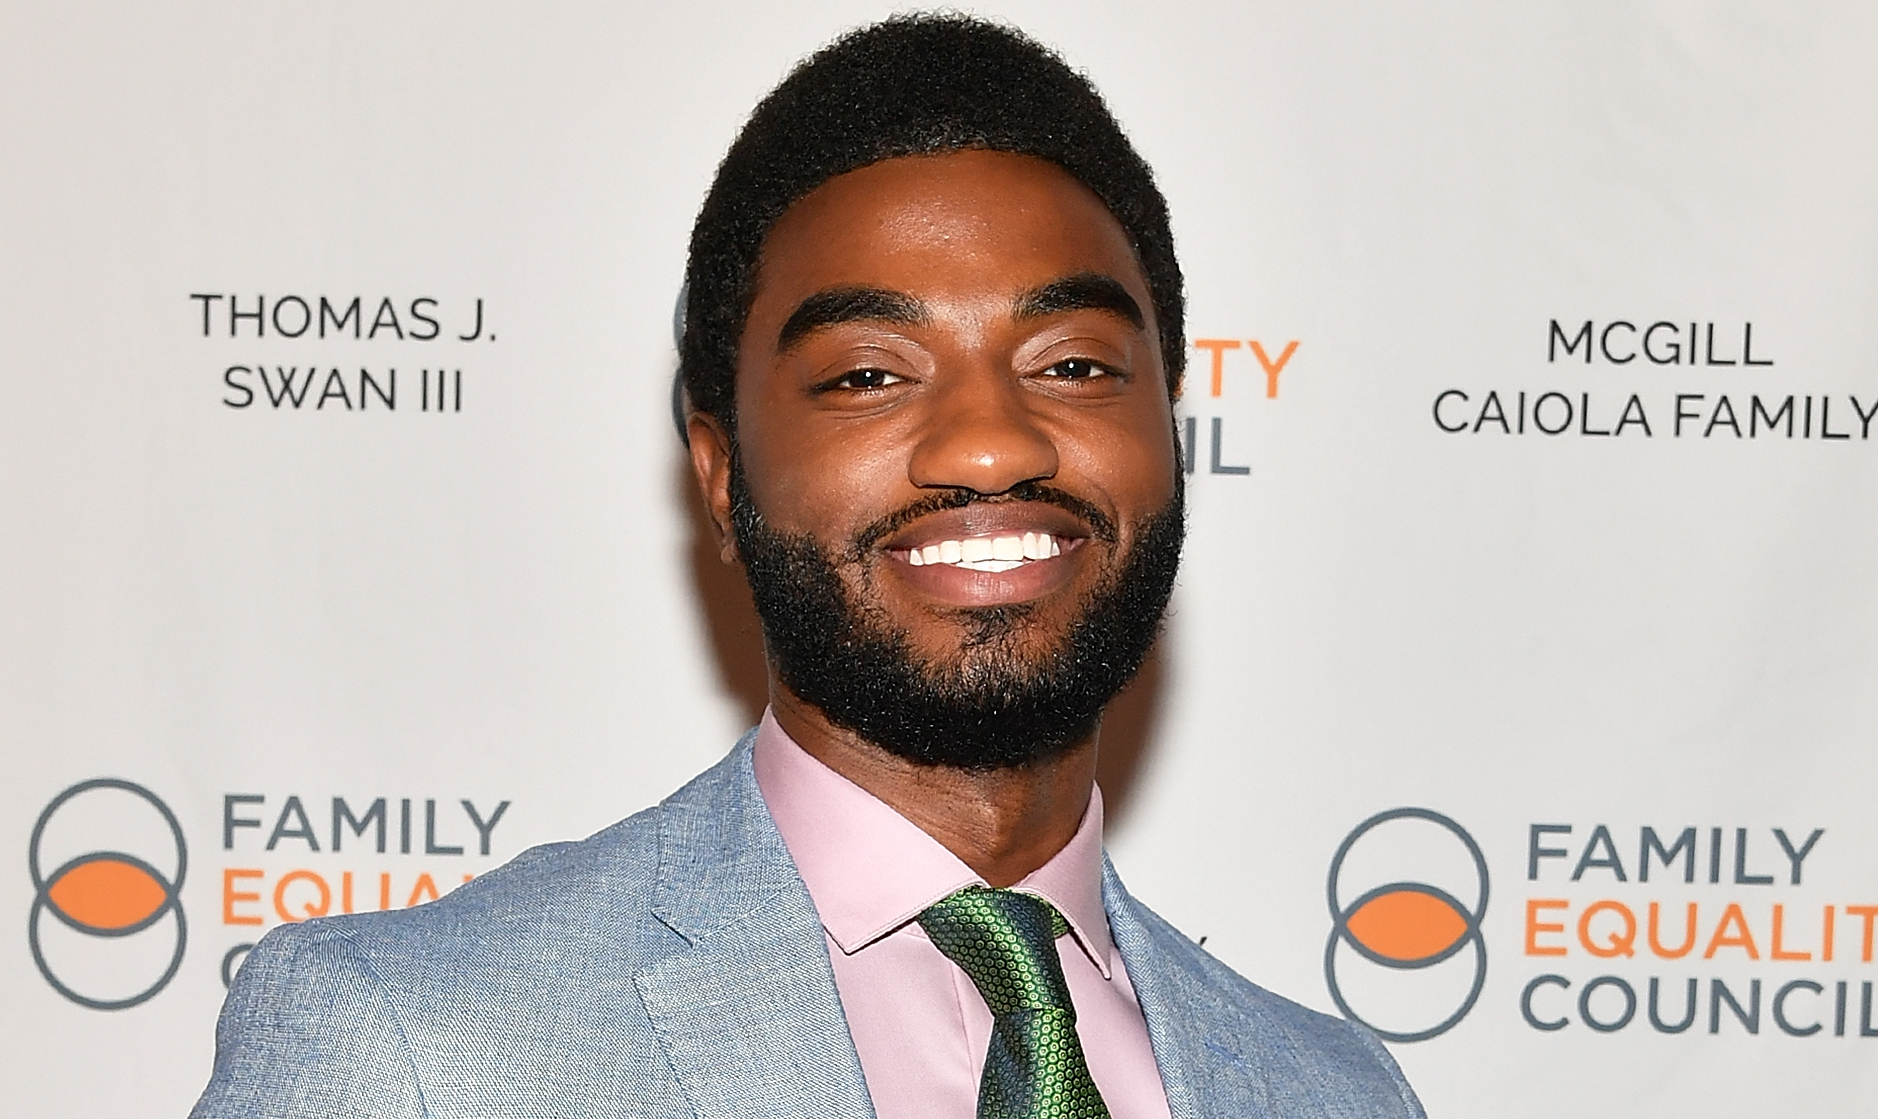 Disney’s ‘Beauty and the Beast’ Prequel Series Adds Jelani Alladin